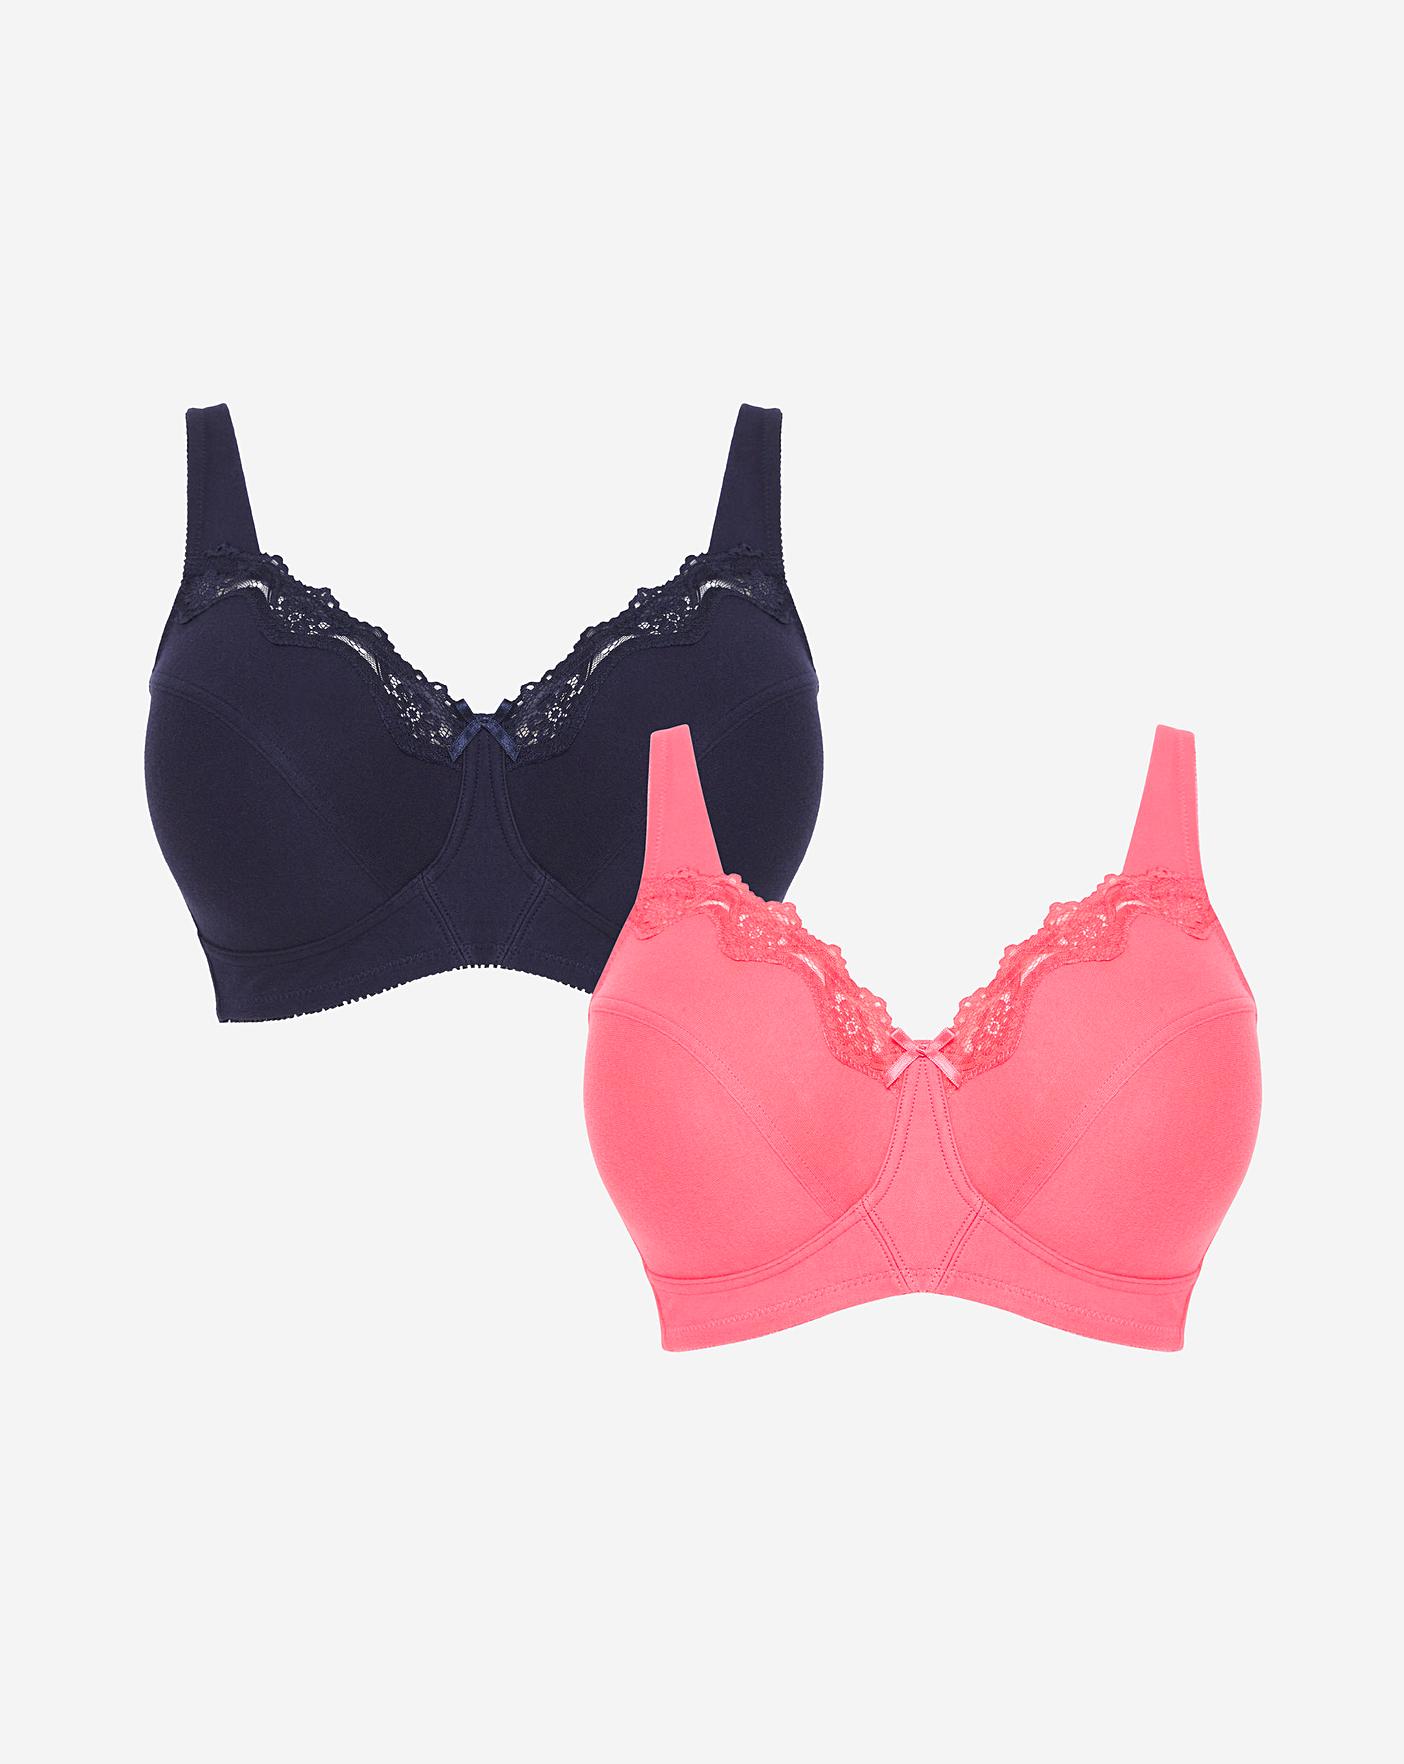 2 Pack Sarah Full Cup Wired Bras